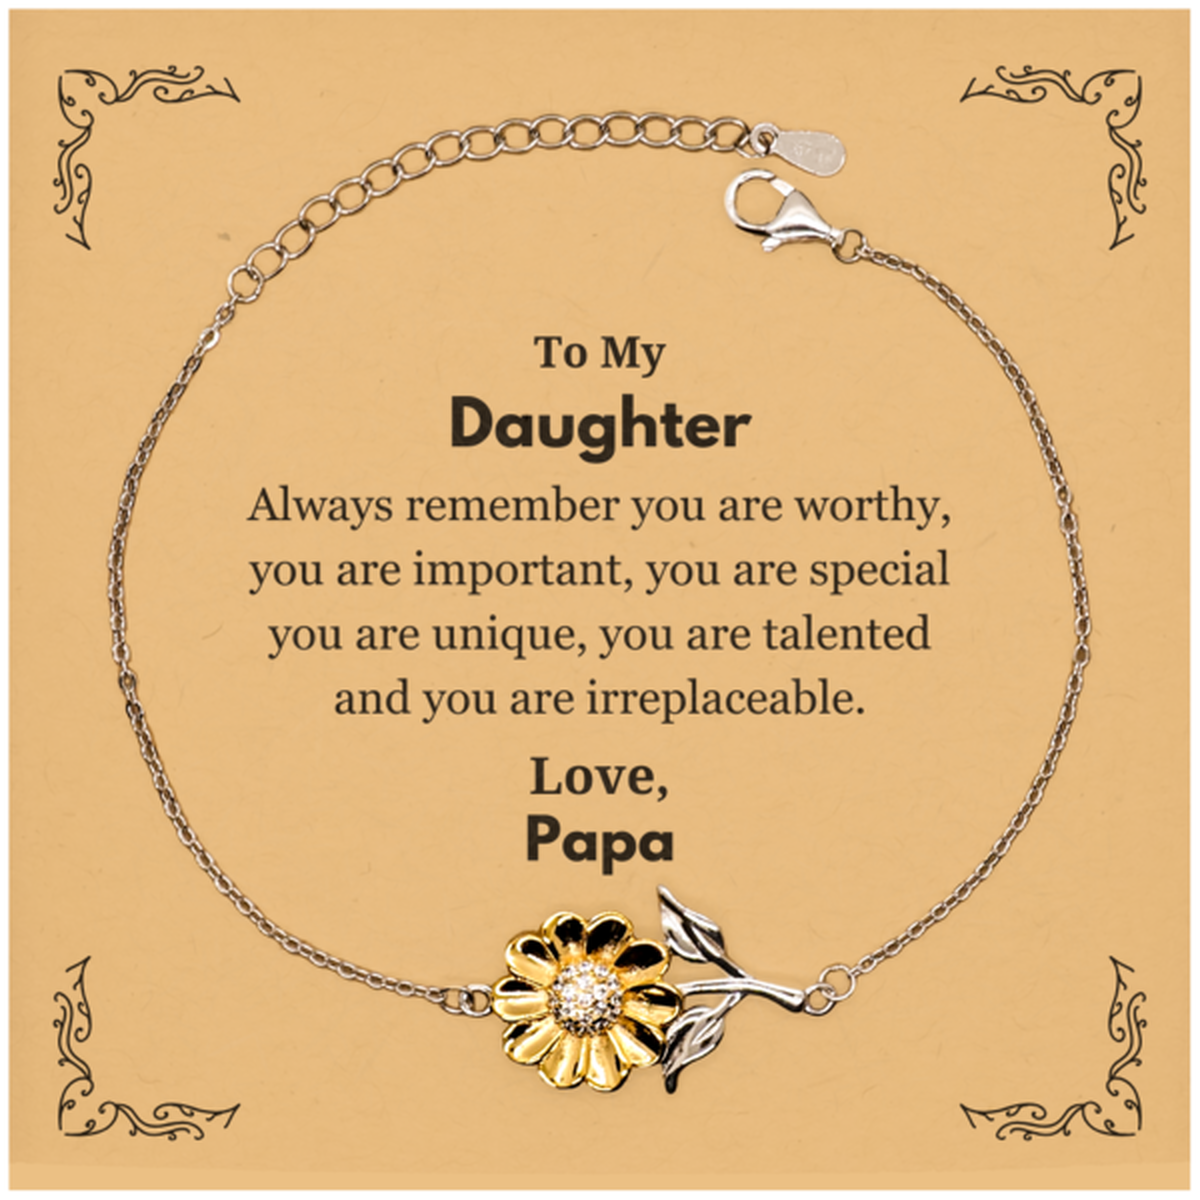 Daughter Birthday Gifts from Papa, Inspirational Sunflower Bracelet for Daughter Christmas Graduation Gifts for Daughter Always remember you are worthy, you are important. Love, Papa